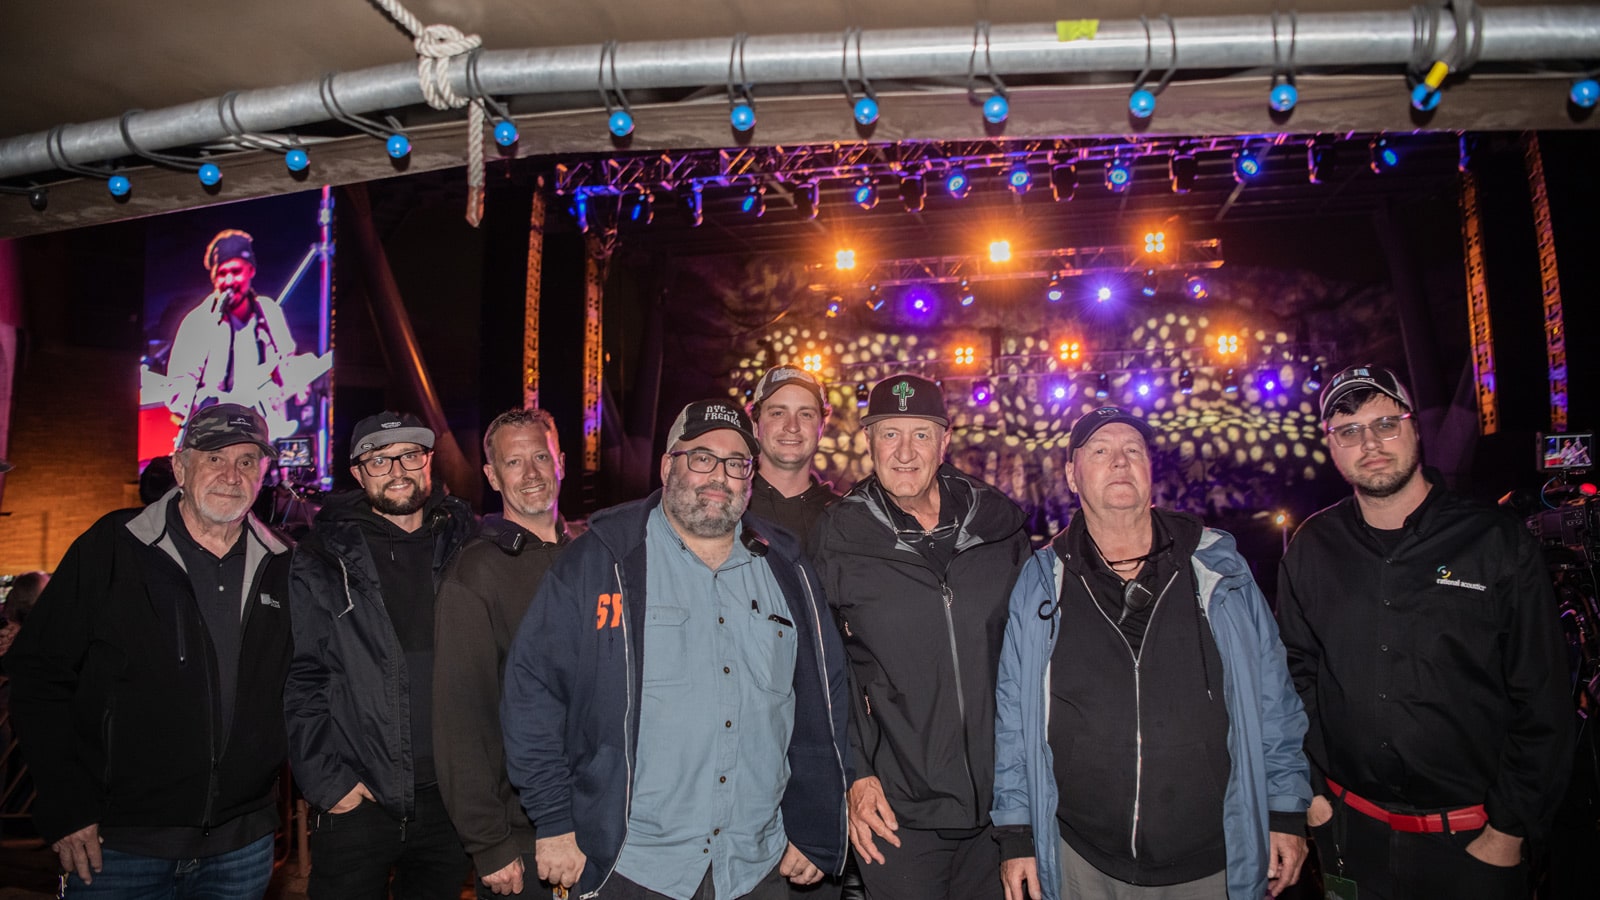 (L-R) Bill Schuermann (Meyer Sound US Sales Manager, South), Mark Edwards (Monitor Engineer, PSI), Bryan Sparks (PSI A3), Peter Costello (JRAD FOH), Austin Hart (Production Coordinator, PSI), Alan Hart (Owner, PSI), Sparky Nielsen (Audio Tech, PSI), Michael Lawrence (Systems Engineer)